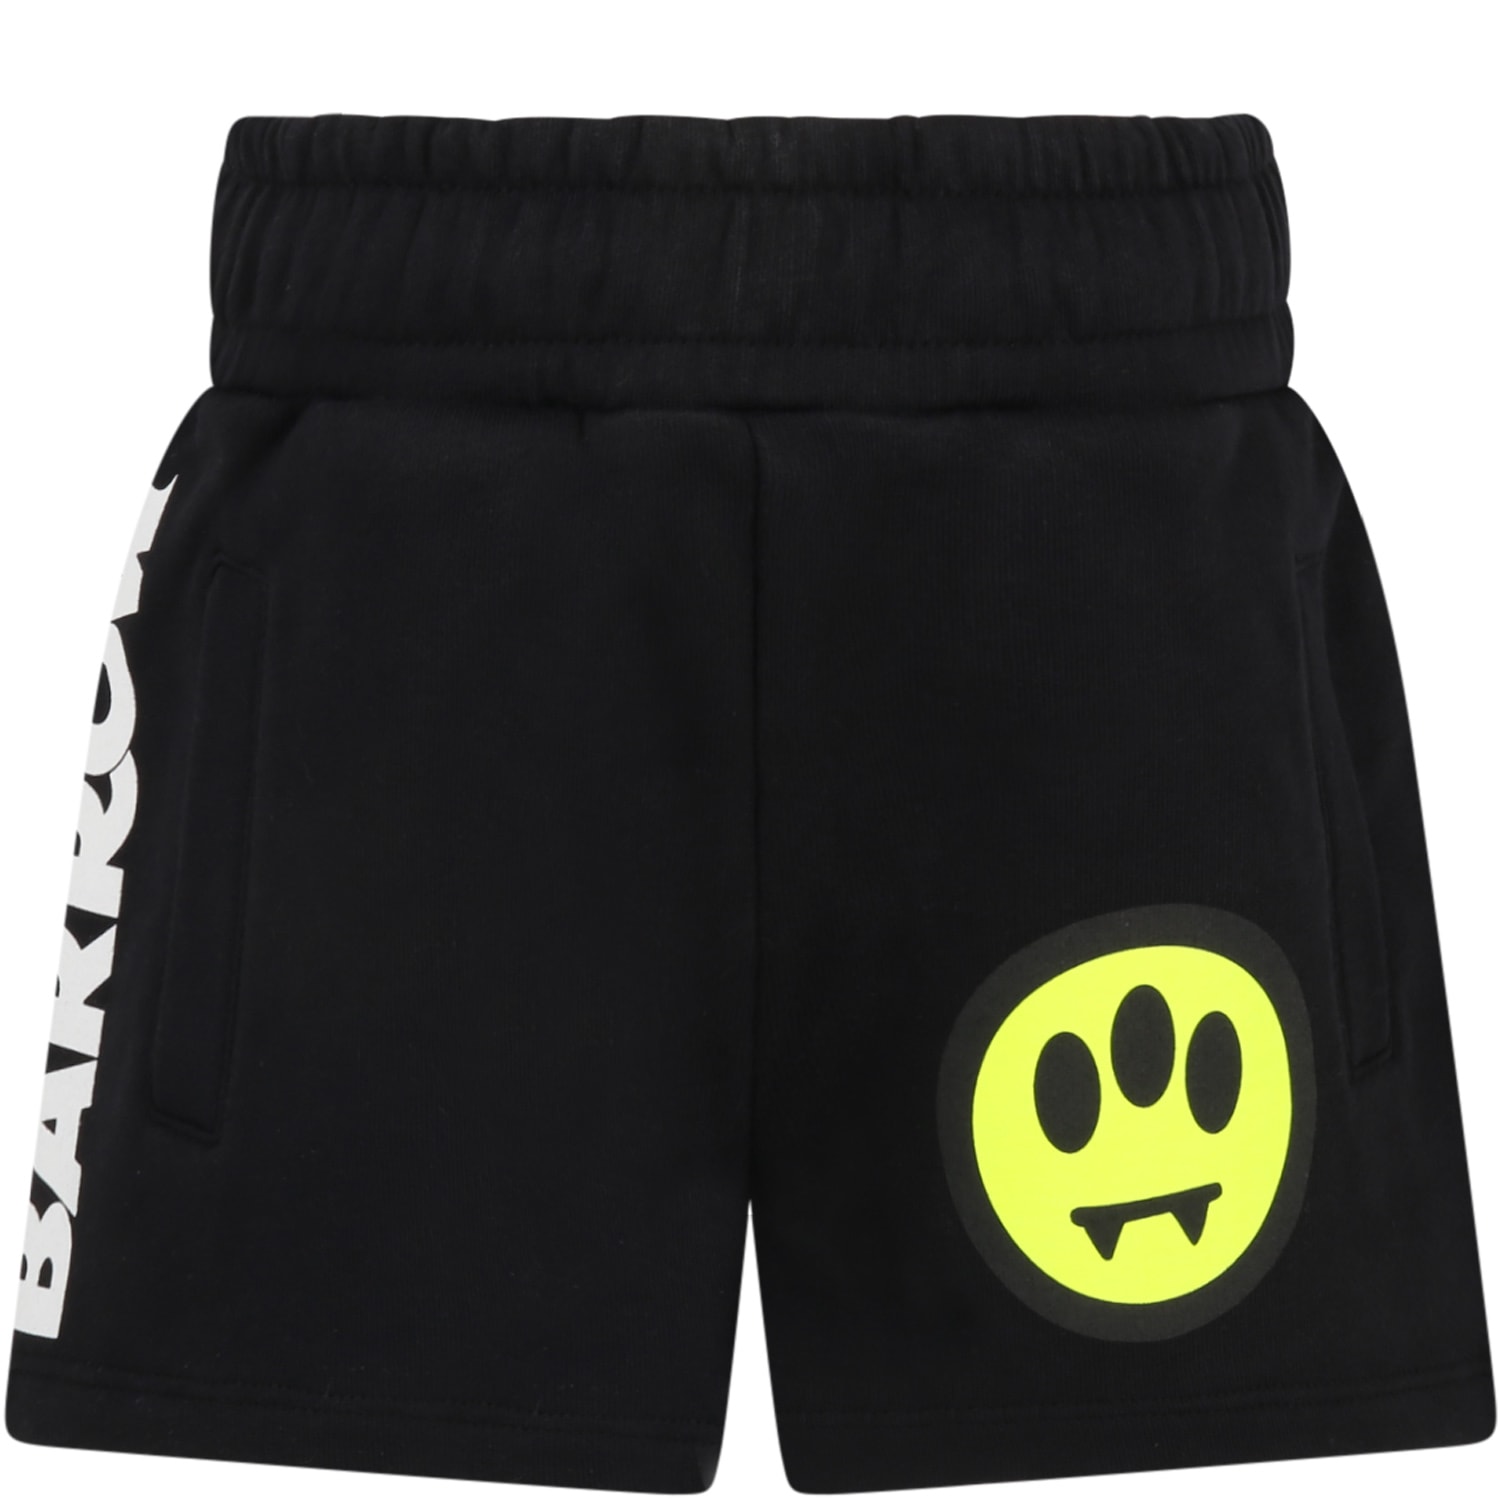 Barrow Black Short For Girl With Smile